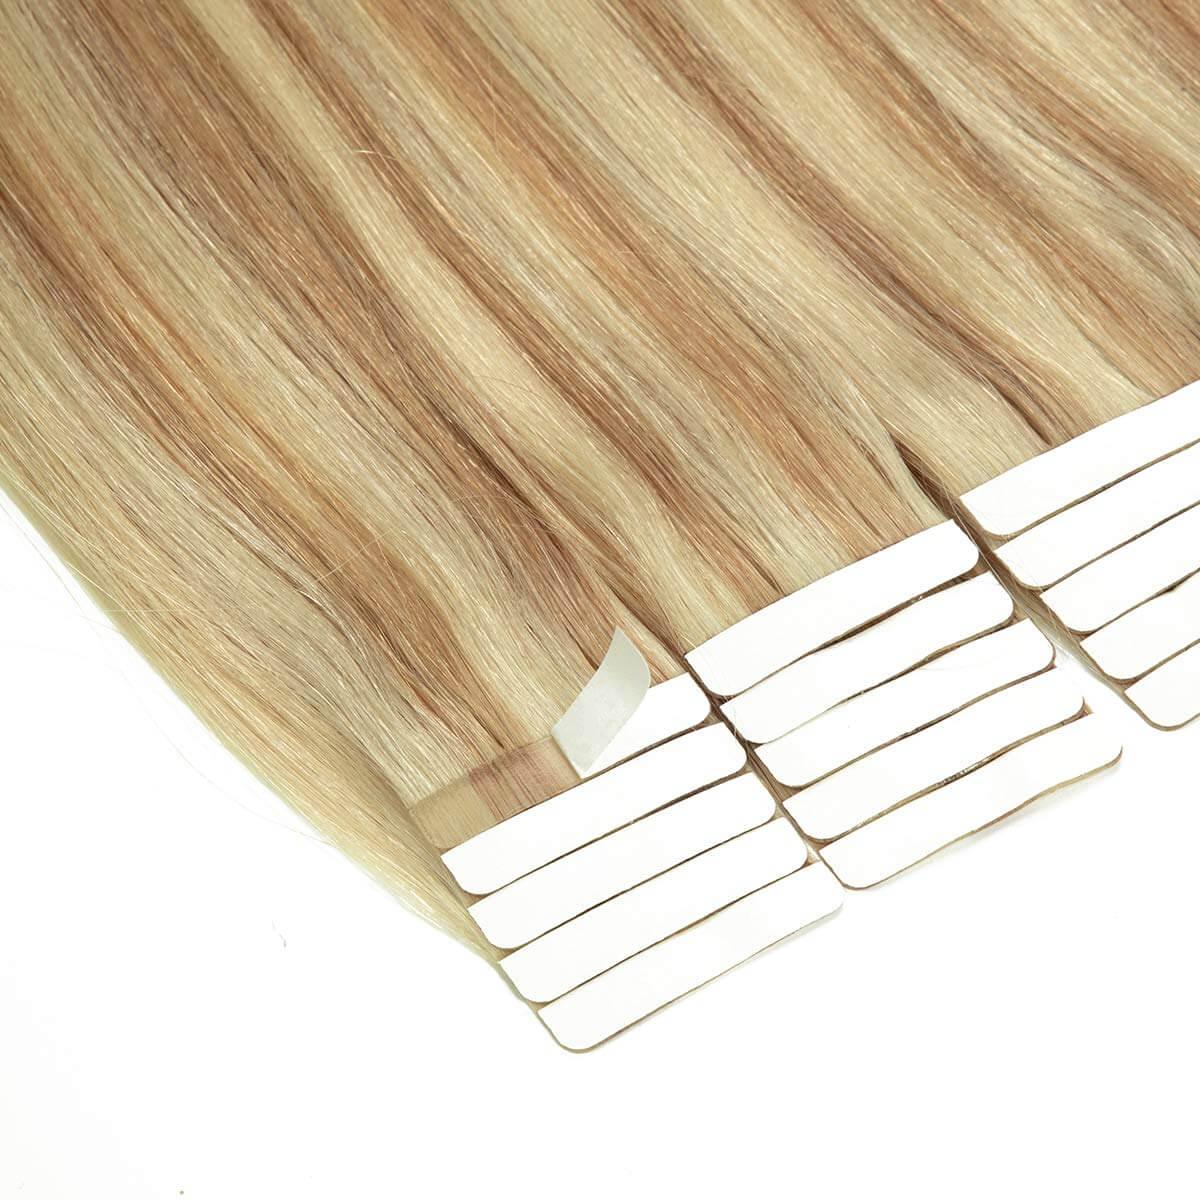 Tape In Hair Extension P#12/60 Highlight Golden Blond Mixed Platinum Blonde - lacerhair